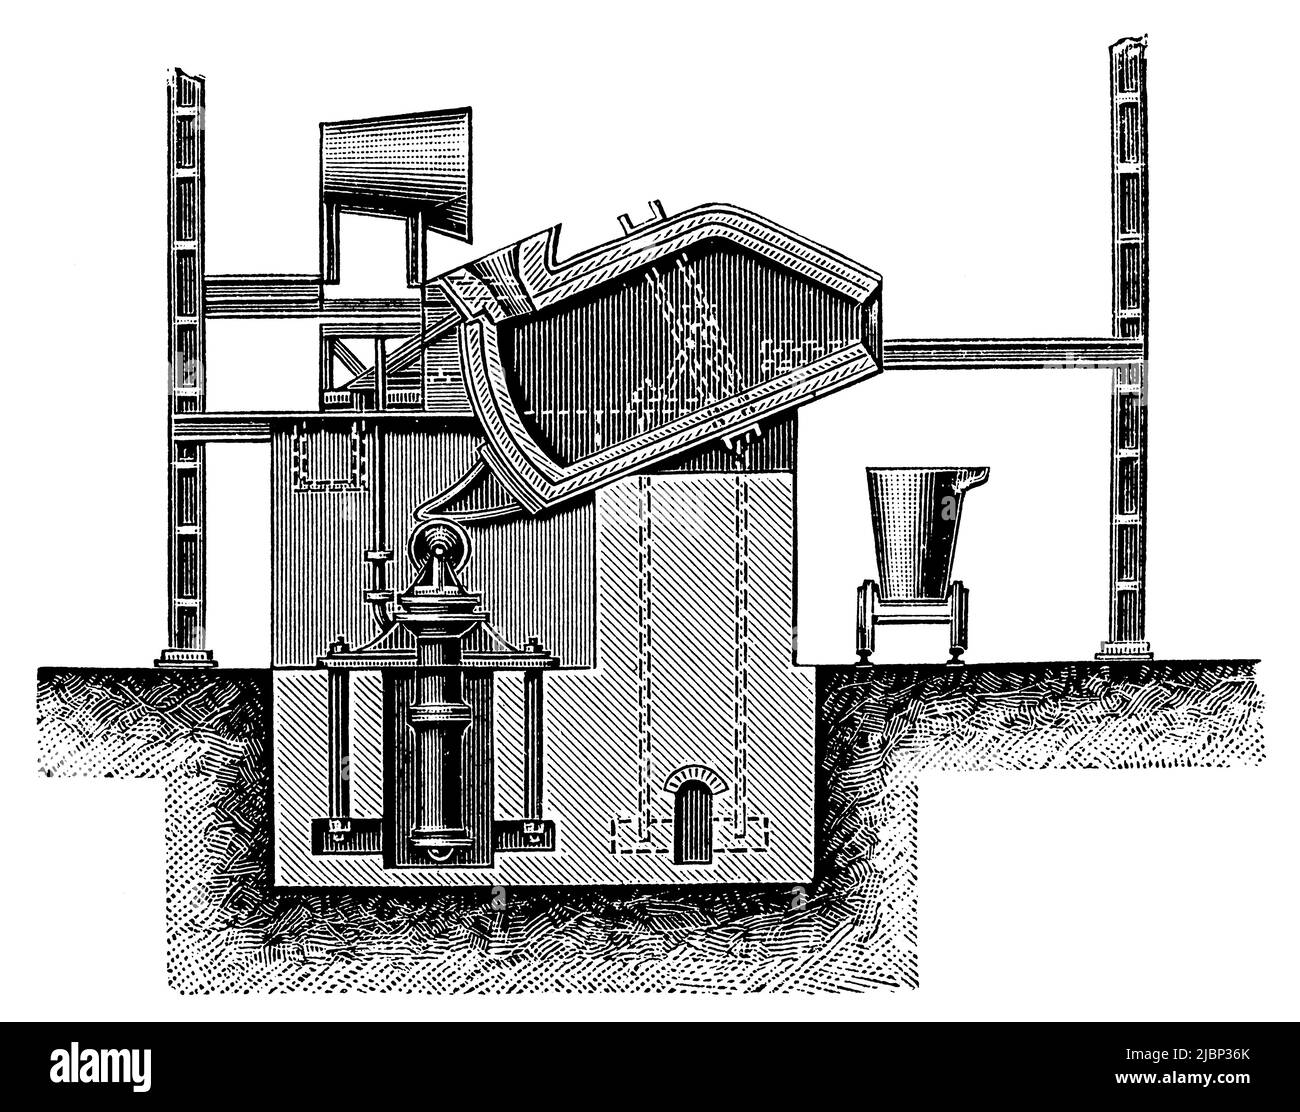 Pig Iron Mixer in cross section. Publication of the book 'Meyers Konversations-Lexikon', Volume 2, Leipzig, Germany, 1910 Stock Photo